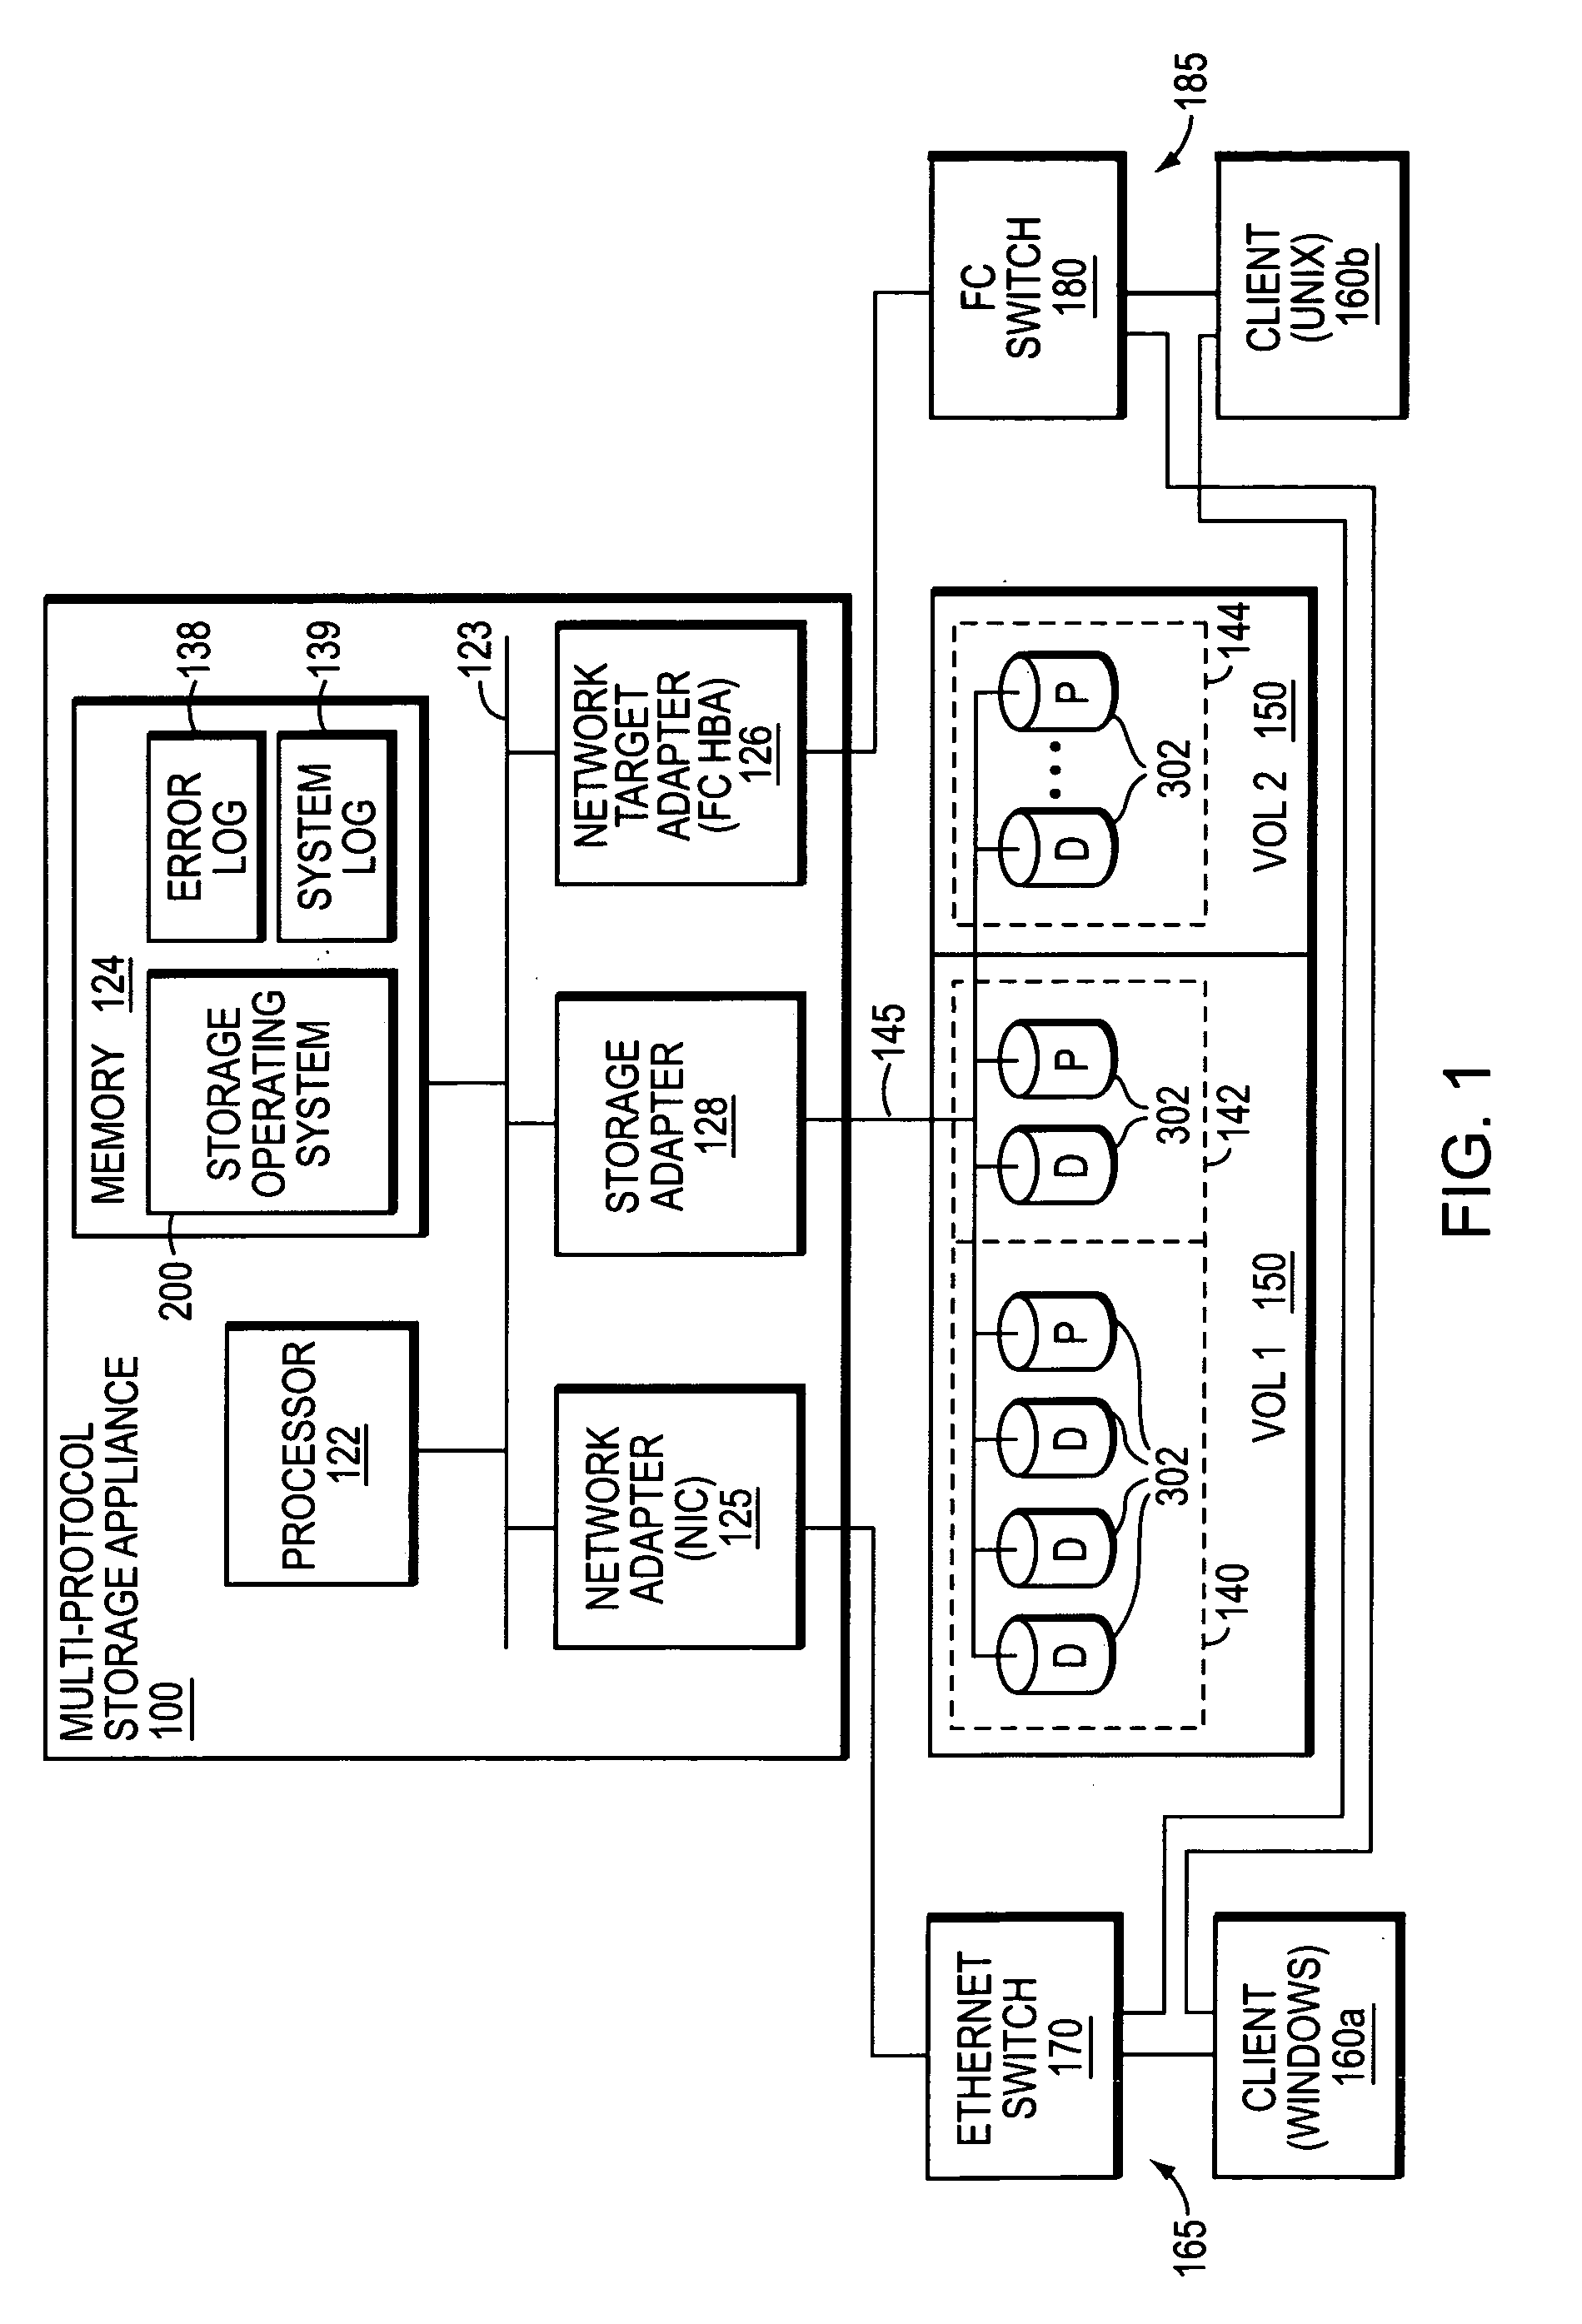 Method and system for reliability analysis of disk drive failures